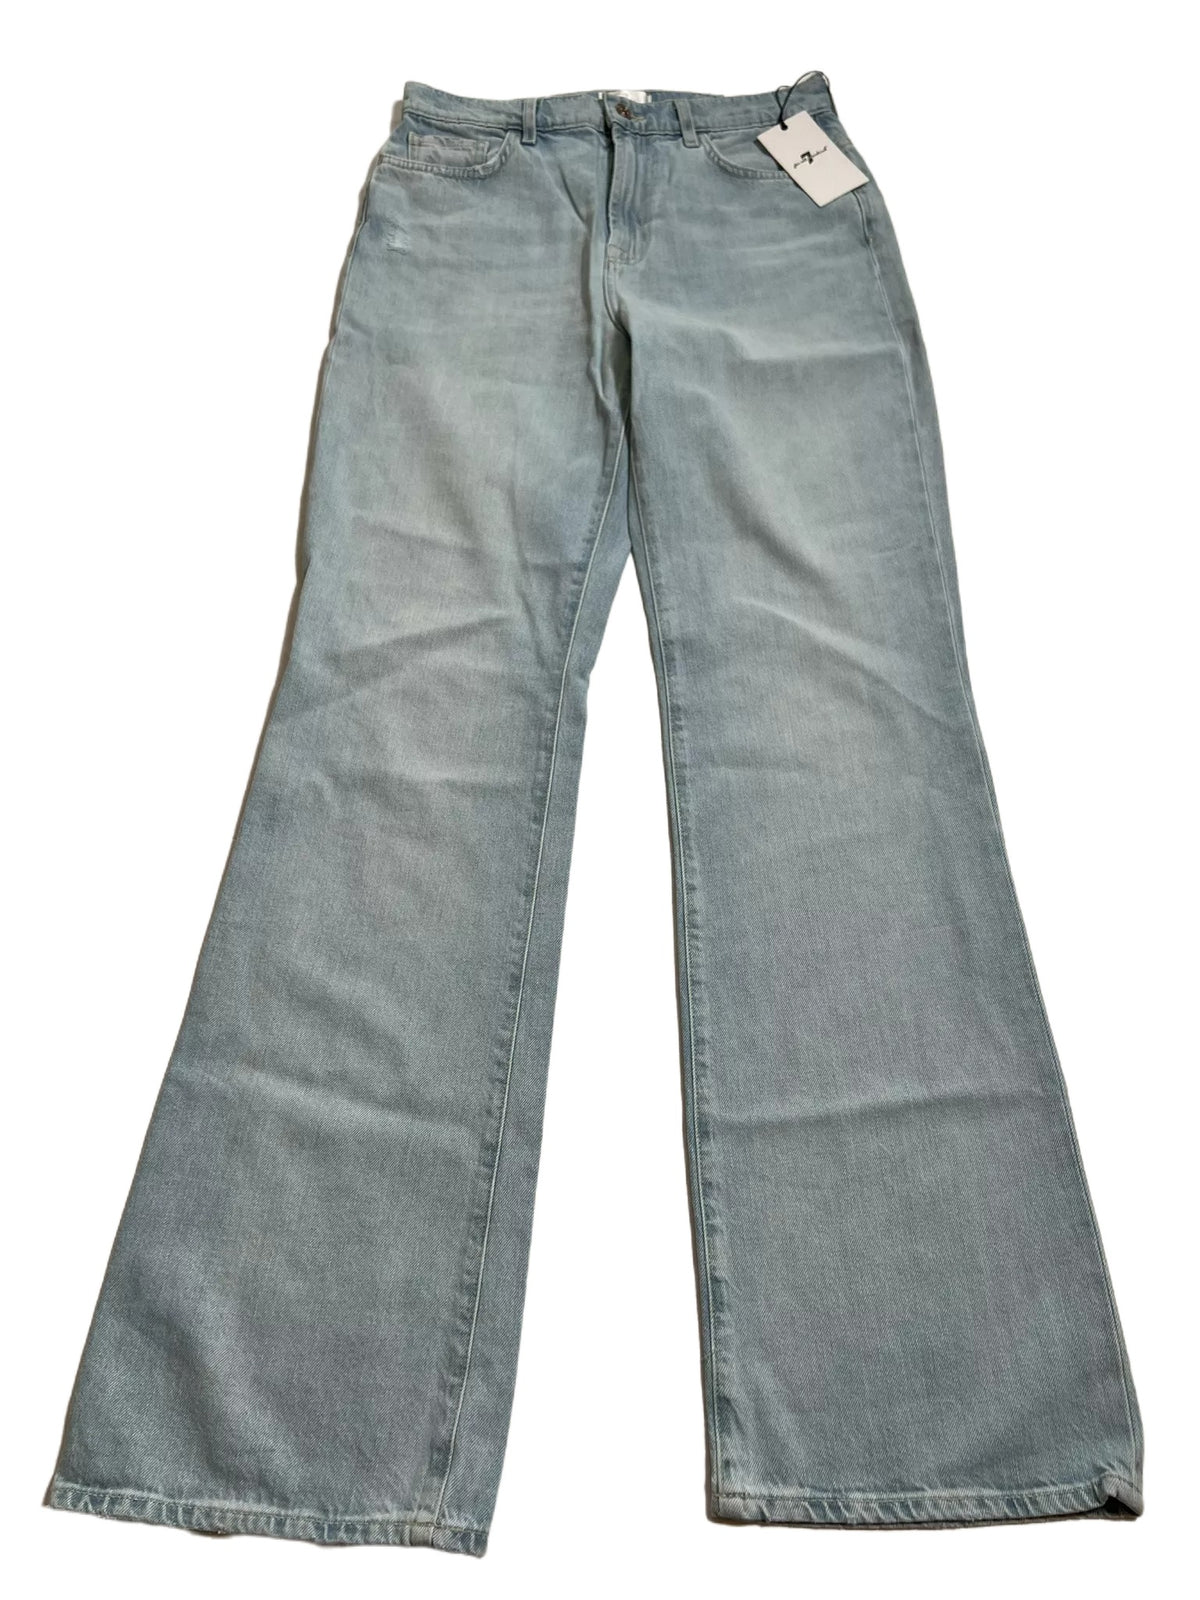 Mankind- "Easy Boot" Light Washed Jeans - NEW WITH TAGS